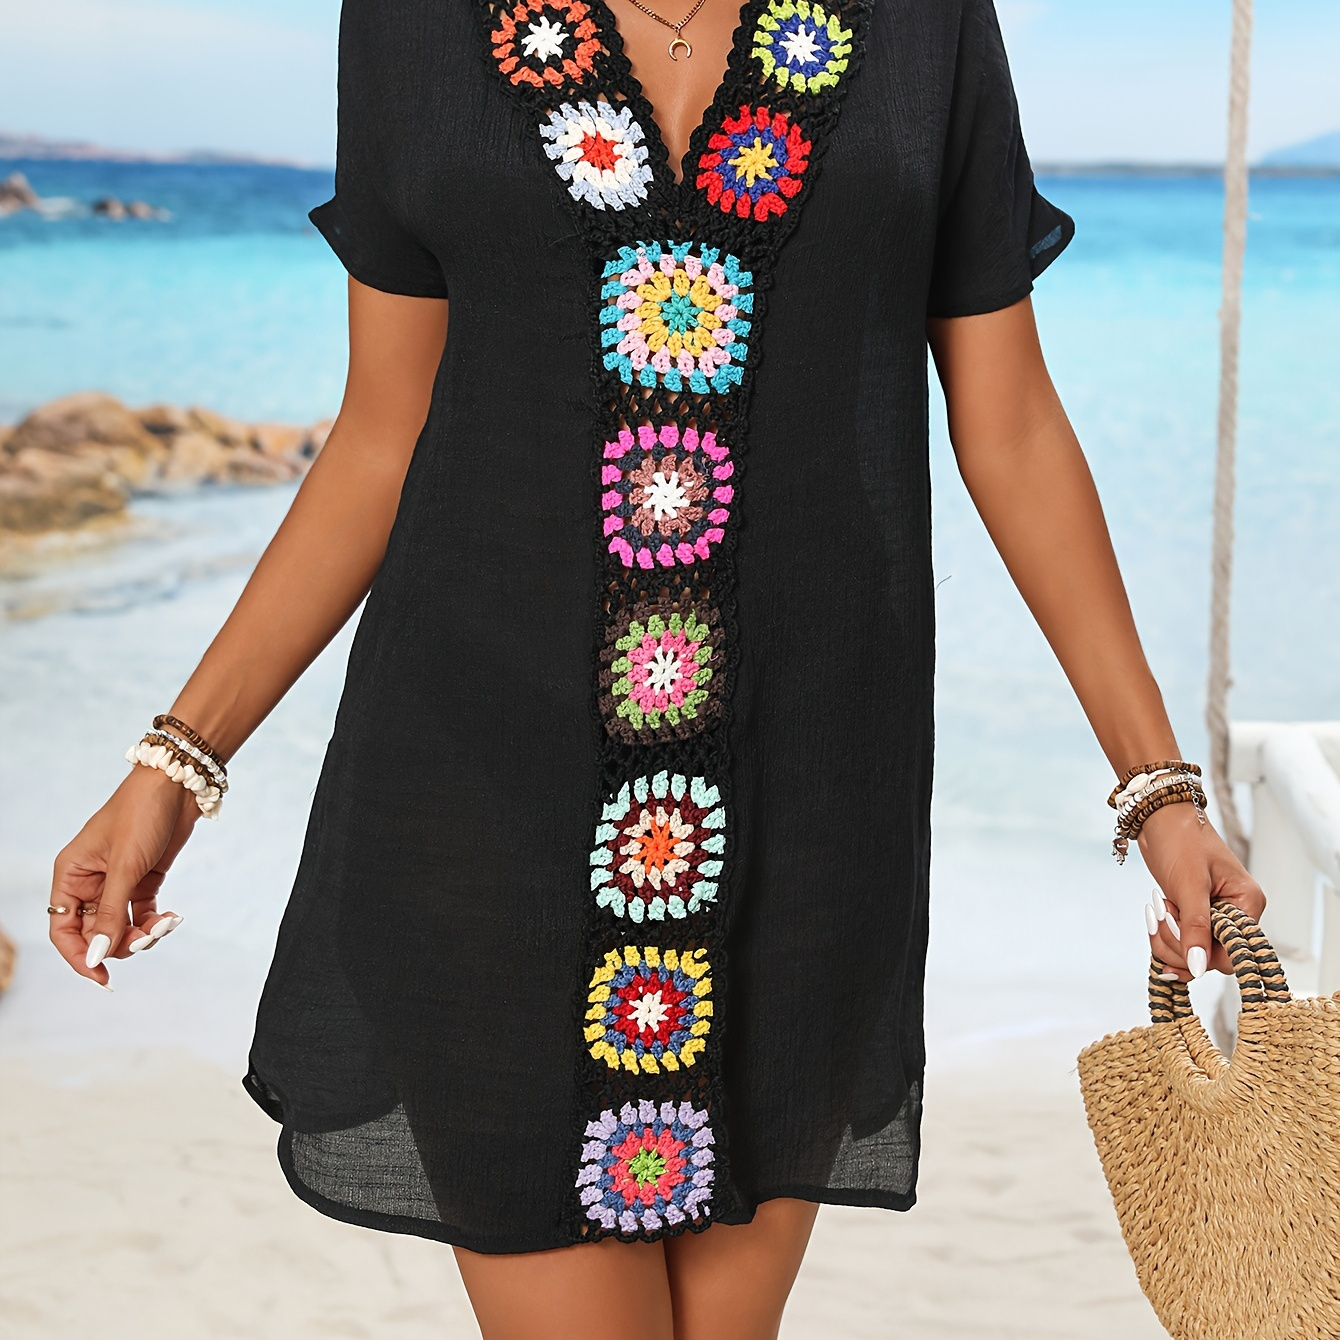 

Women's Casual Crochet Shift Cover Up Dress, Short Sleeve Summer Beach Tunic With Multicolor Floral Accents